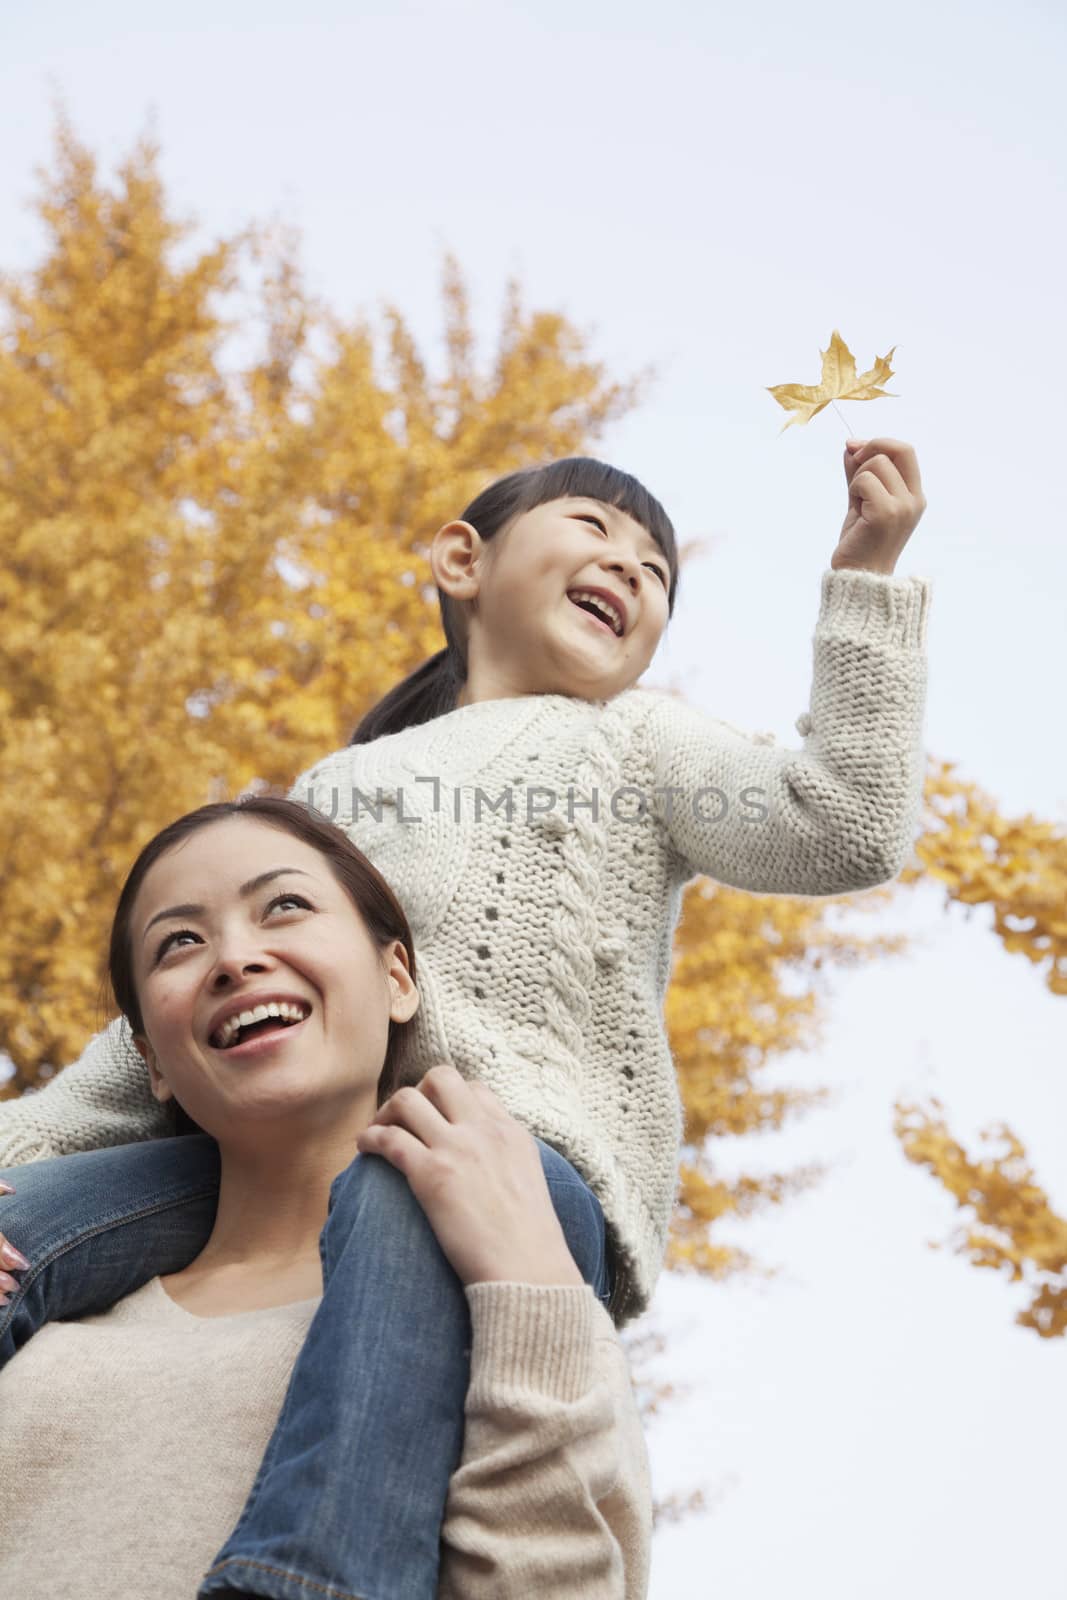 Mother and Daughter Enjoying a Park in Autumn by XiXinXing